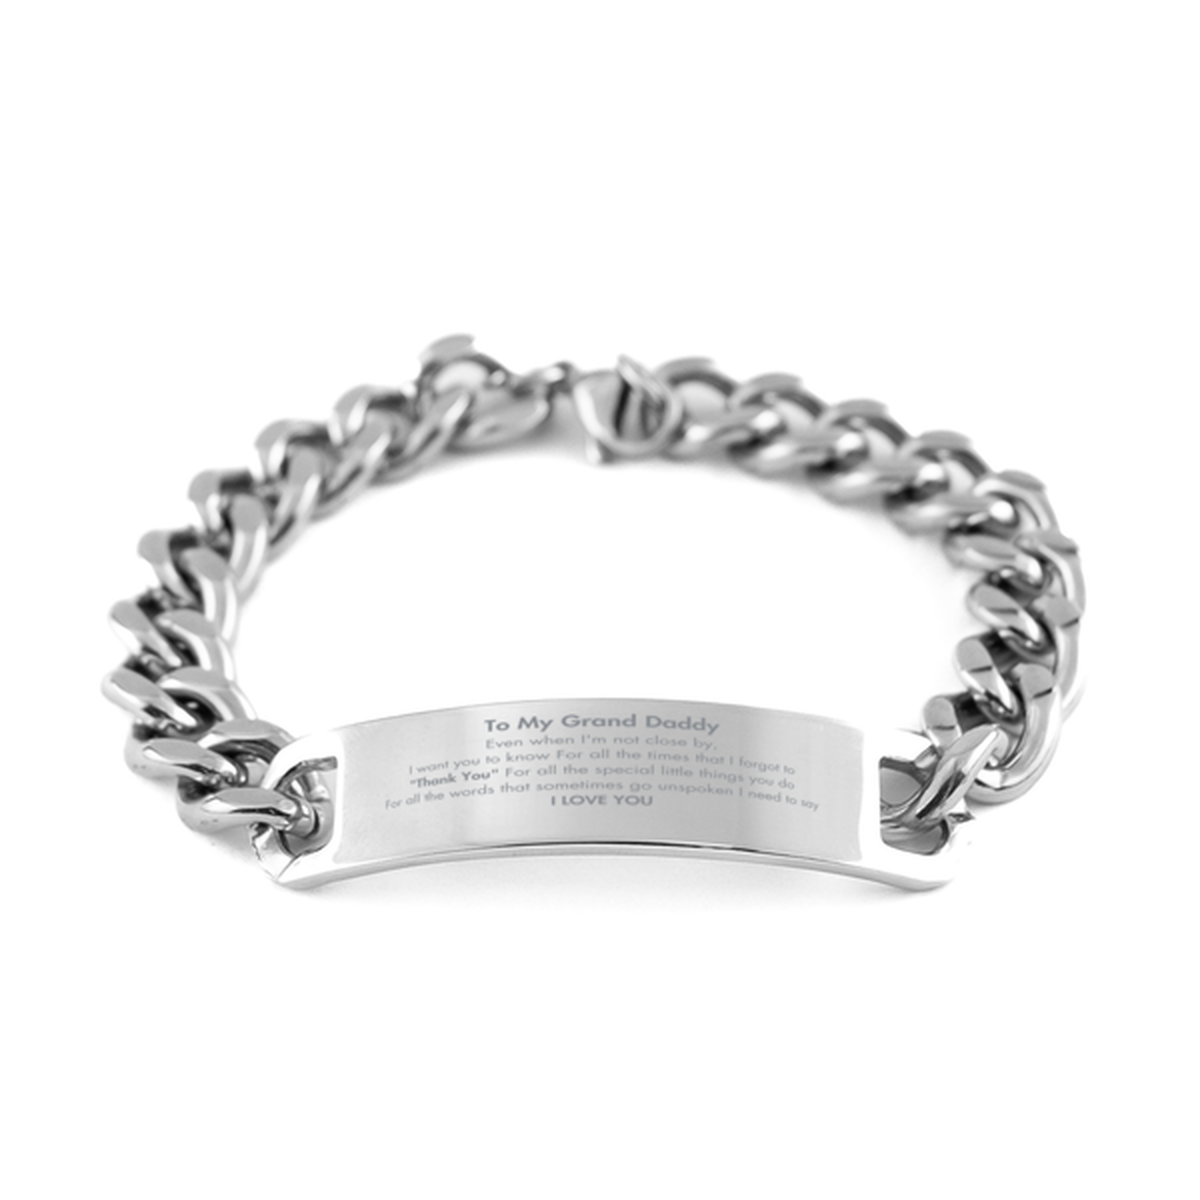 Thank You Gifts for Grand Daddy, Keepsake Cuban Chain Stainless Steel Bracelet Gifts for Grand Daddy Birthday Mother's day Father's Day Grand Daddy For all the words That sometimes go unspoken I need to say I LOVE YOU